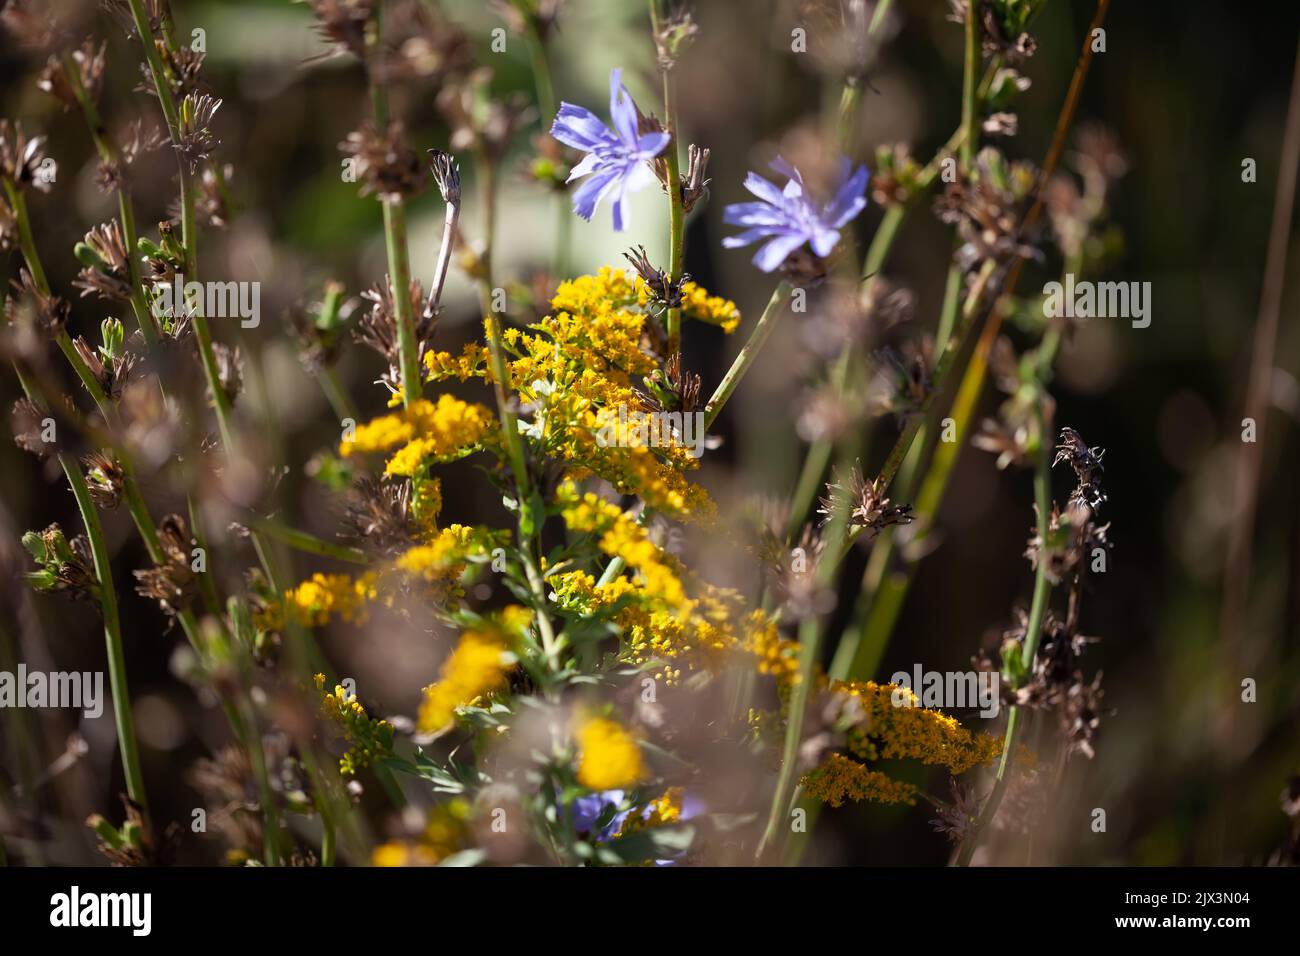 Yellow goldenrod and purple/blue chicory flowers. Stock Photo